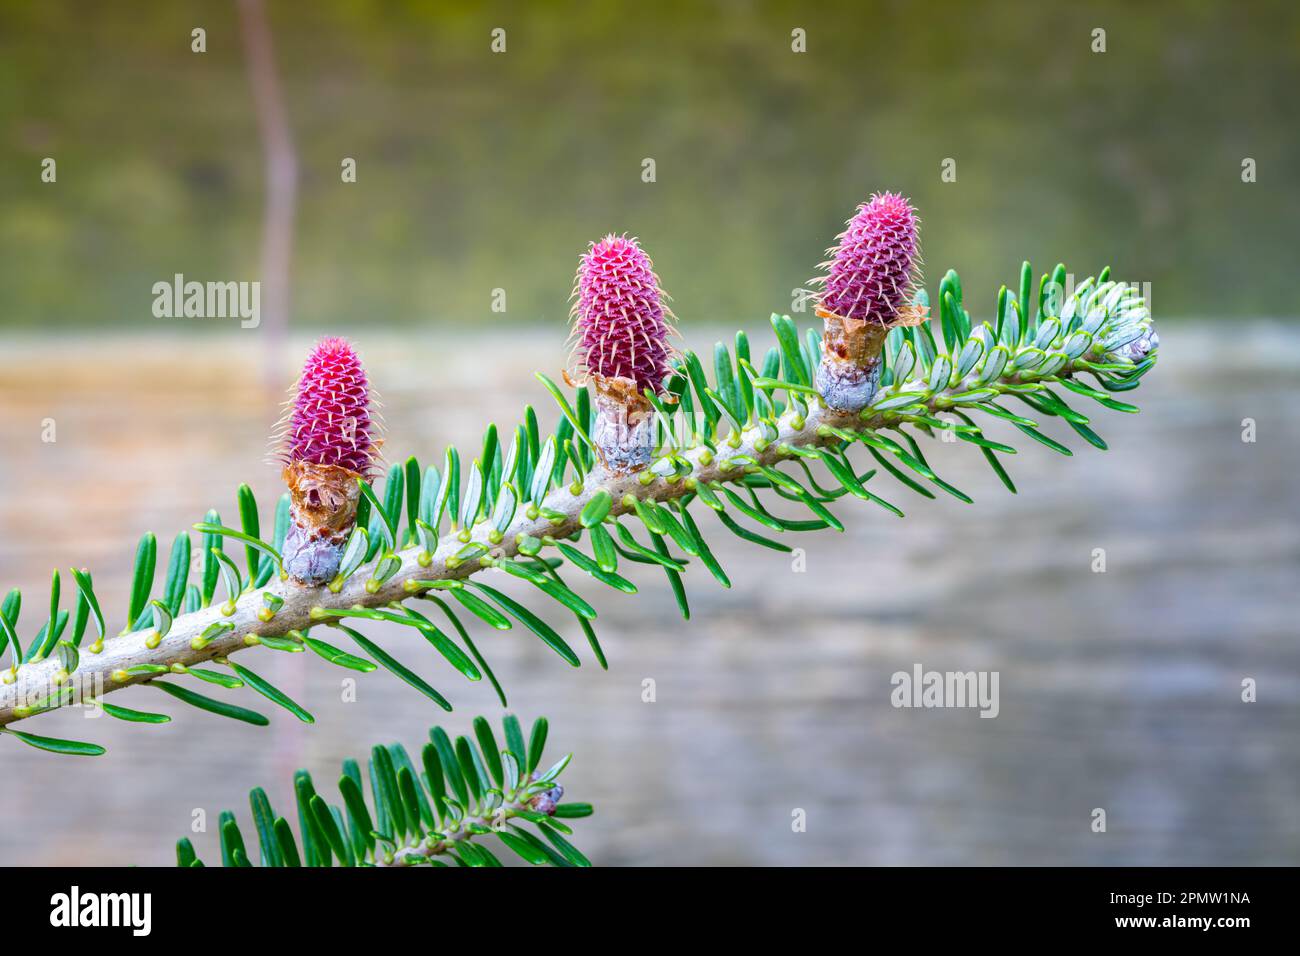 Three young purple cones on a branch of a Korean fir (Abies koreana) Stock Photo